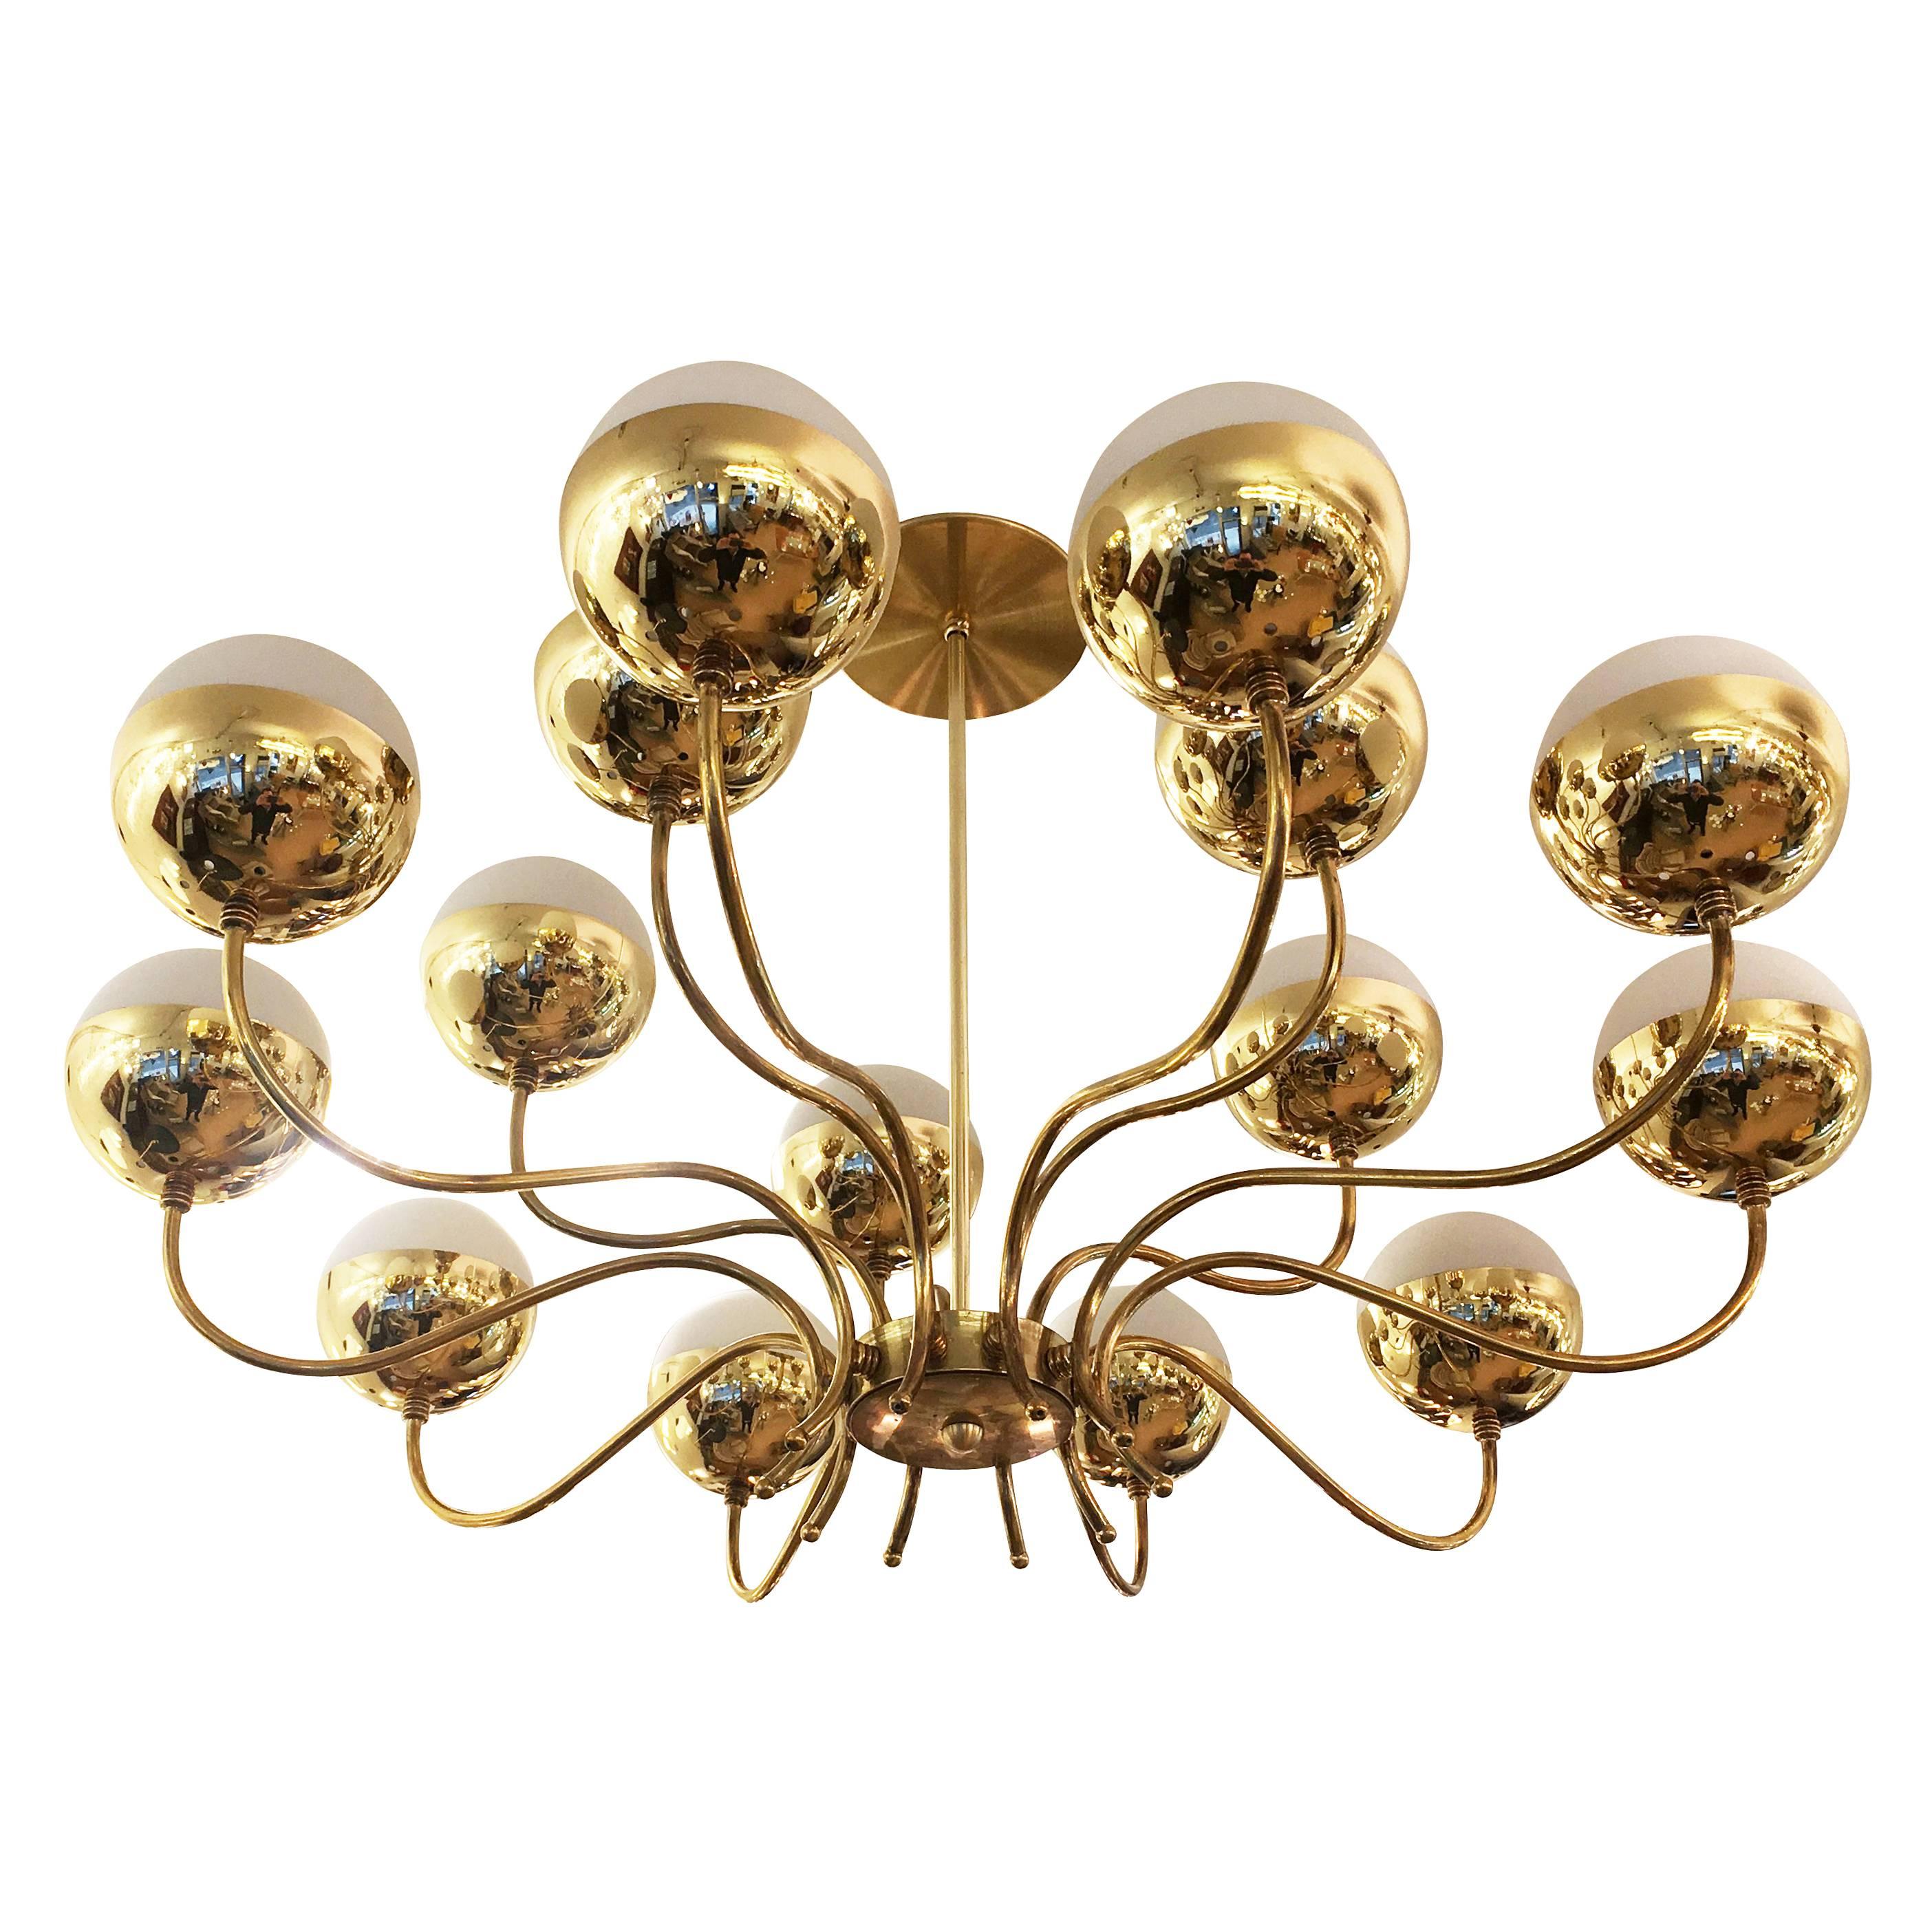 Fifteen-light chandelier in the manner of Stilnovo from the 1950s. The frame is all brass and the shades are frosted glass. Height of stem can be adjusted as needed.

Condition: Excellent vintage condition, minor wear consistent with age and use.